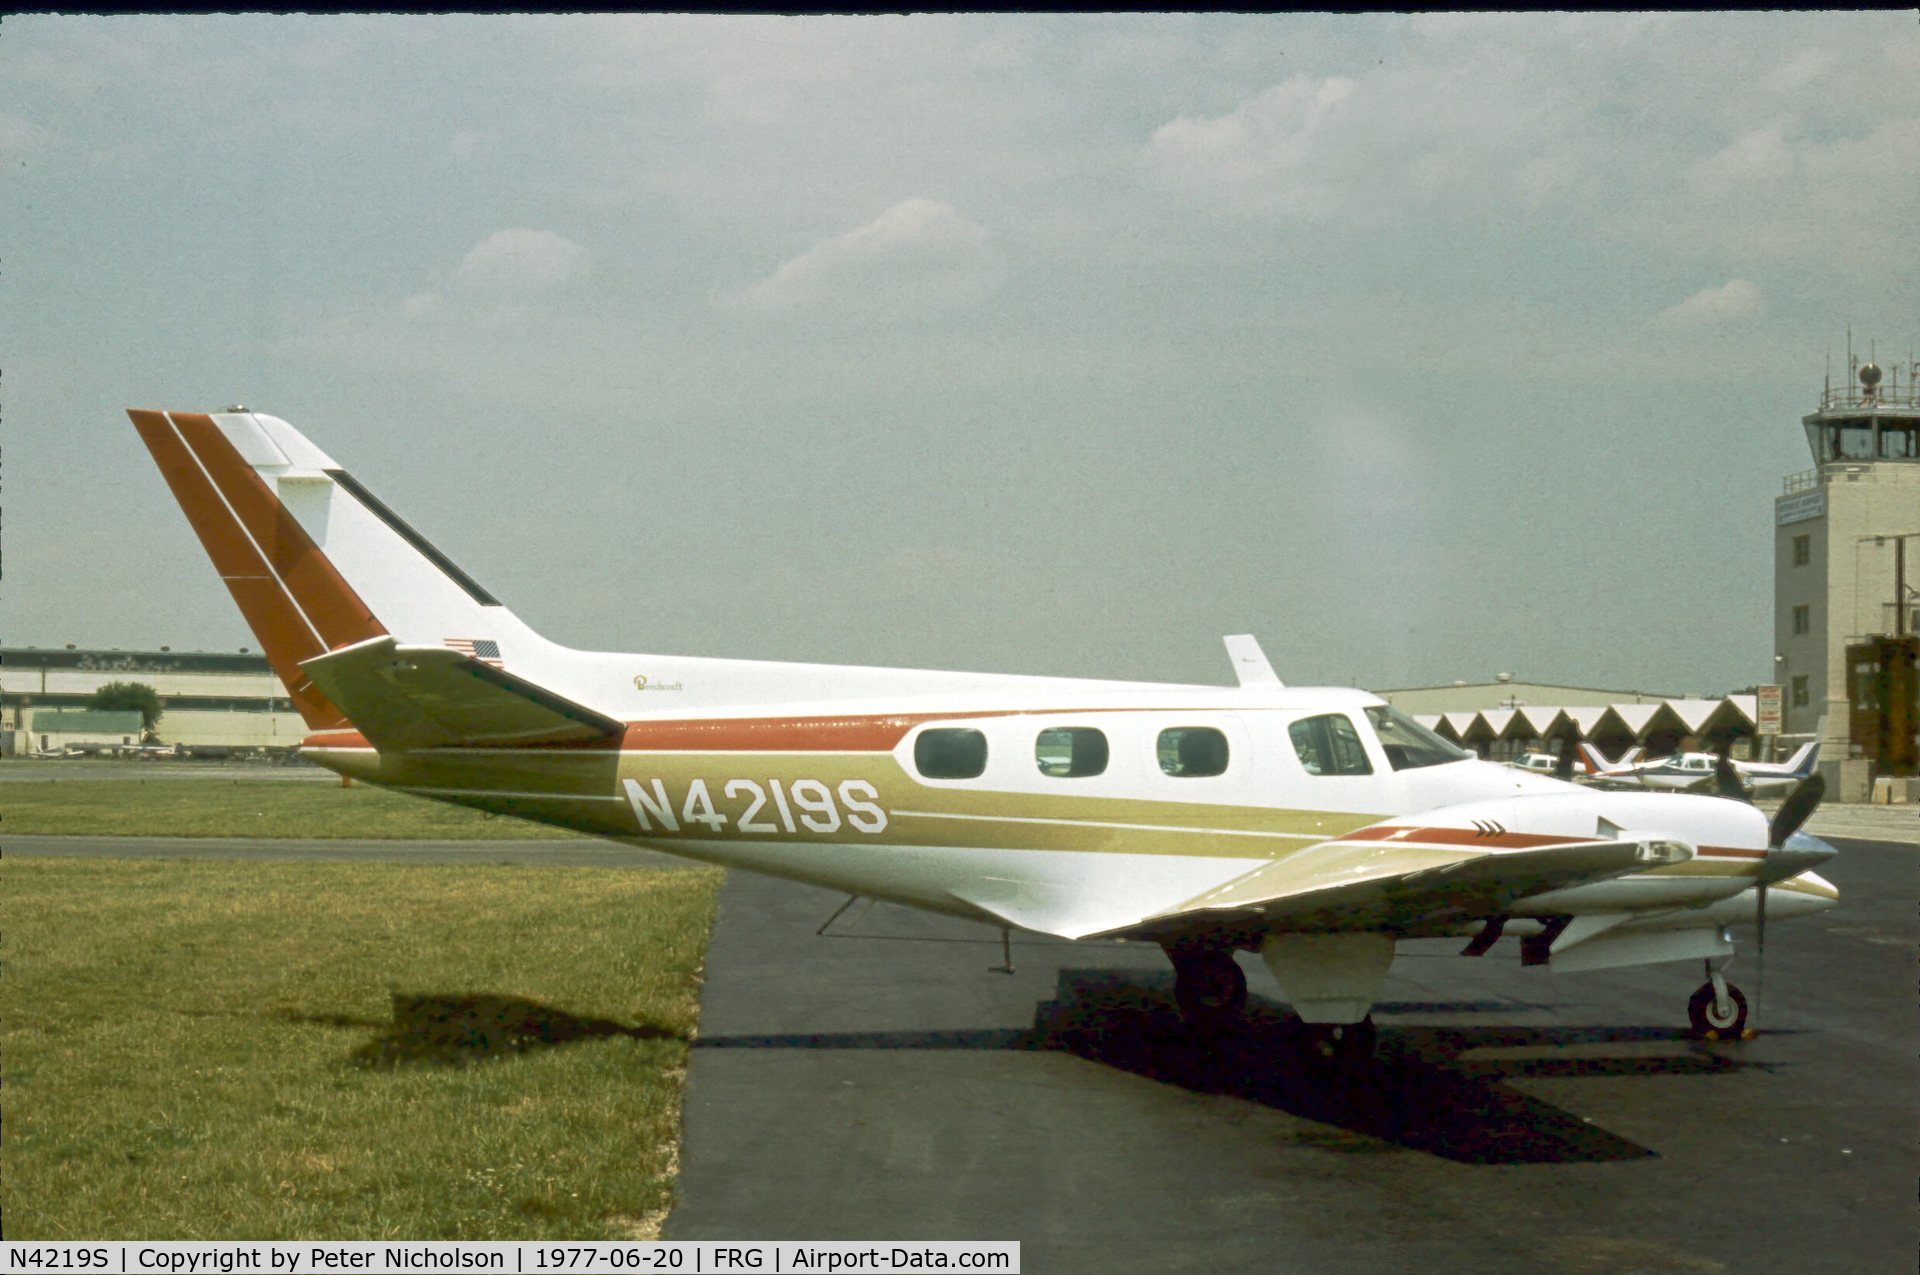 N4219S, 1976 Beech B-60 Duke C/N P-404, This Duke was seen at Republic Airport, Long Island in the Summer of 1977